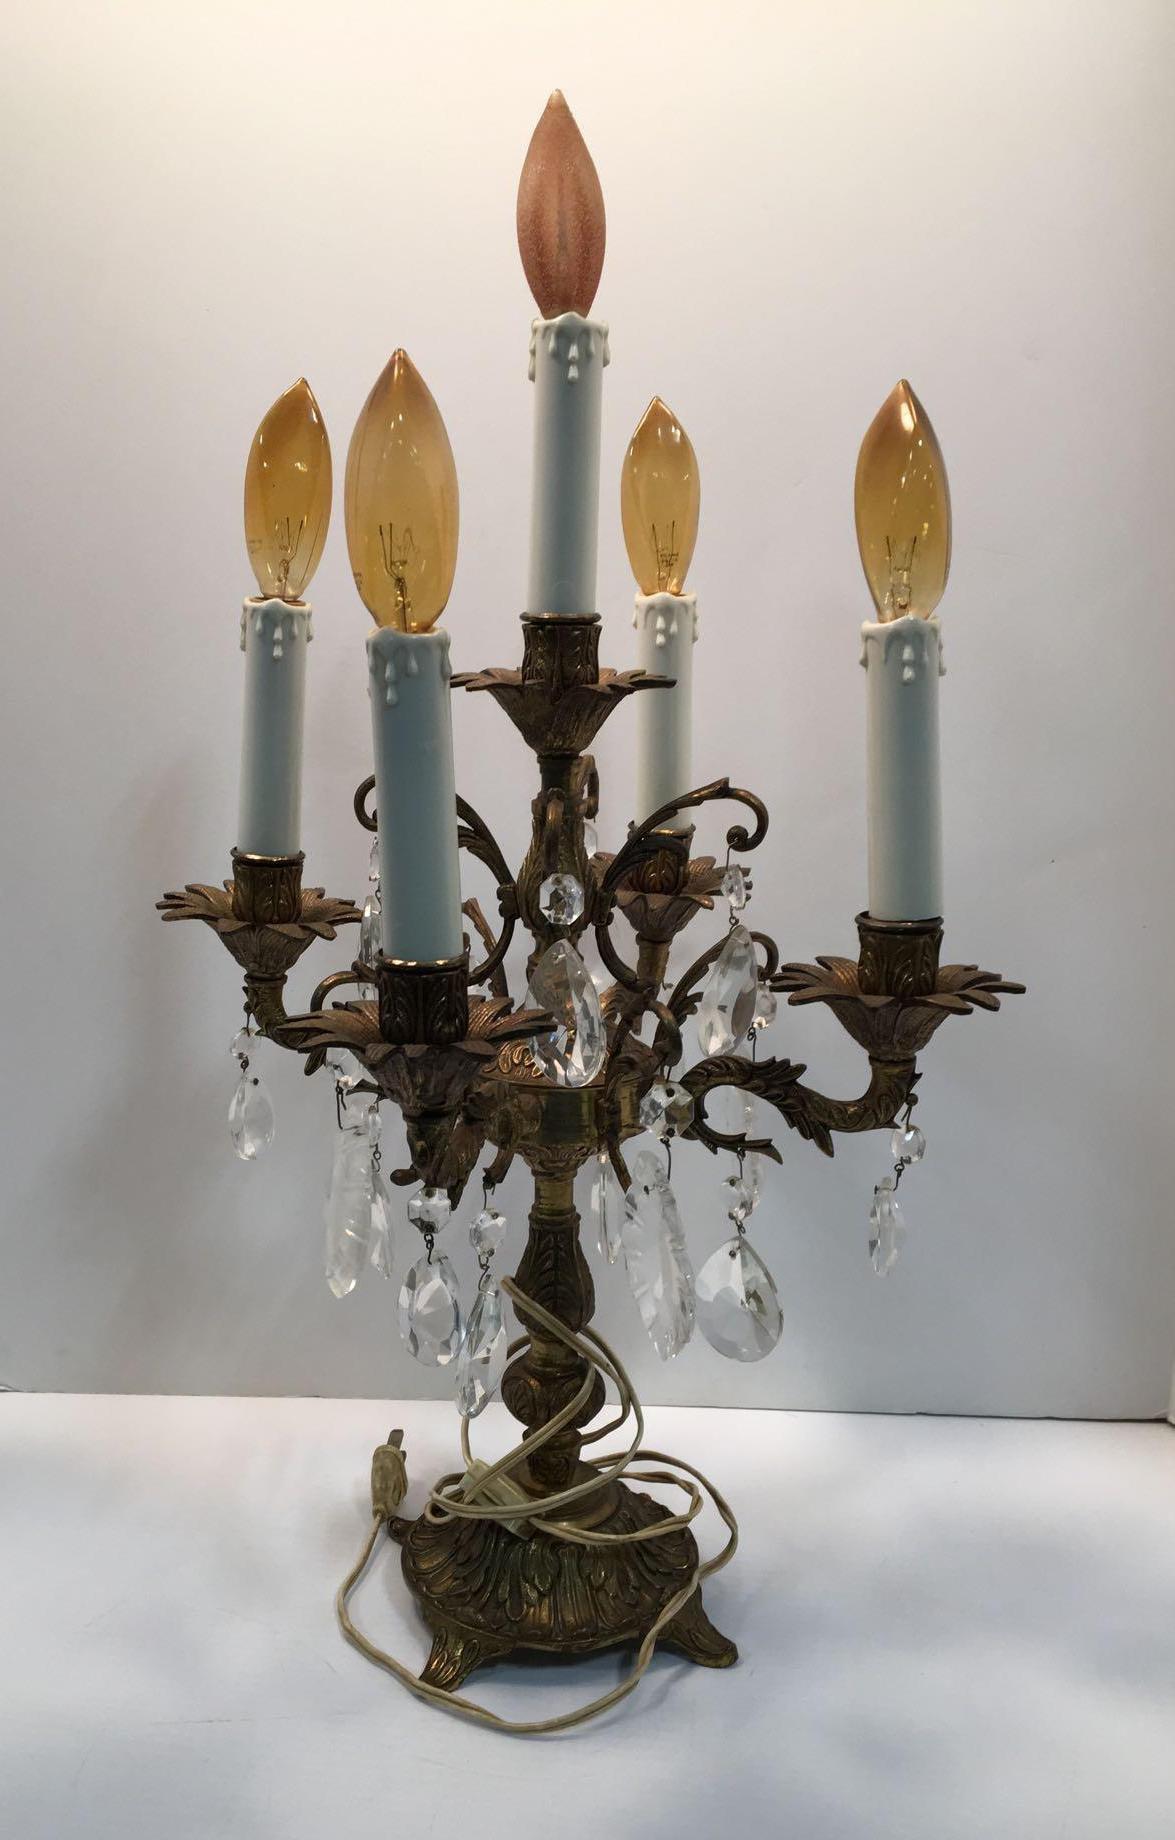 Vintage electric candlestick-like lamp